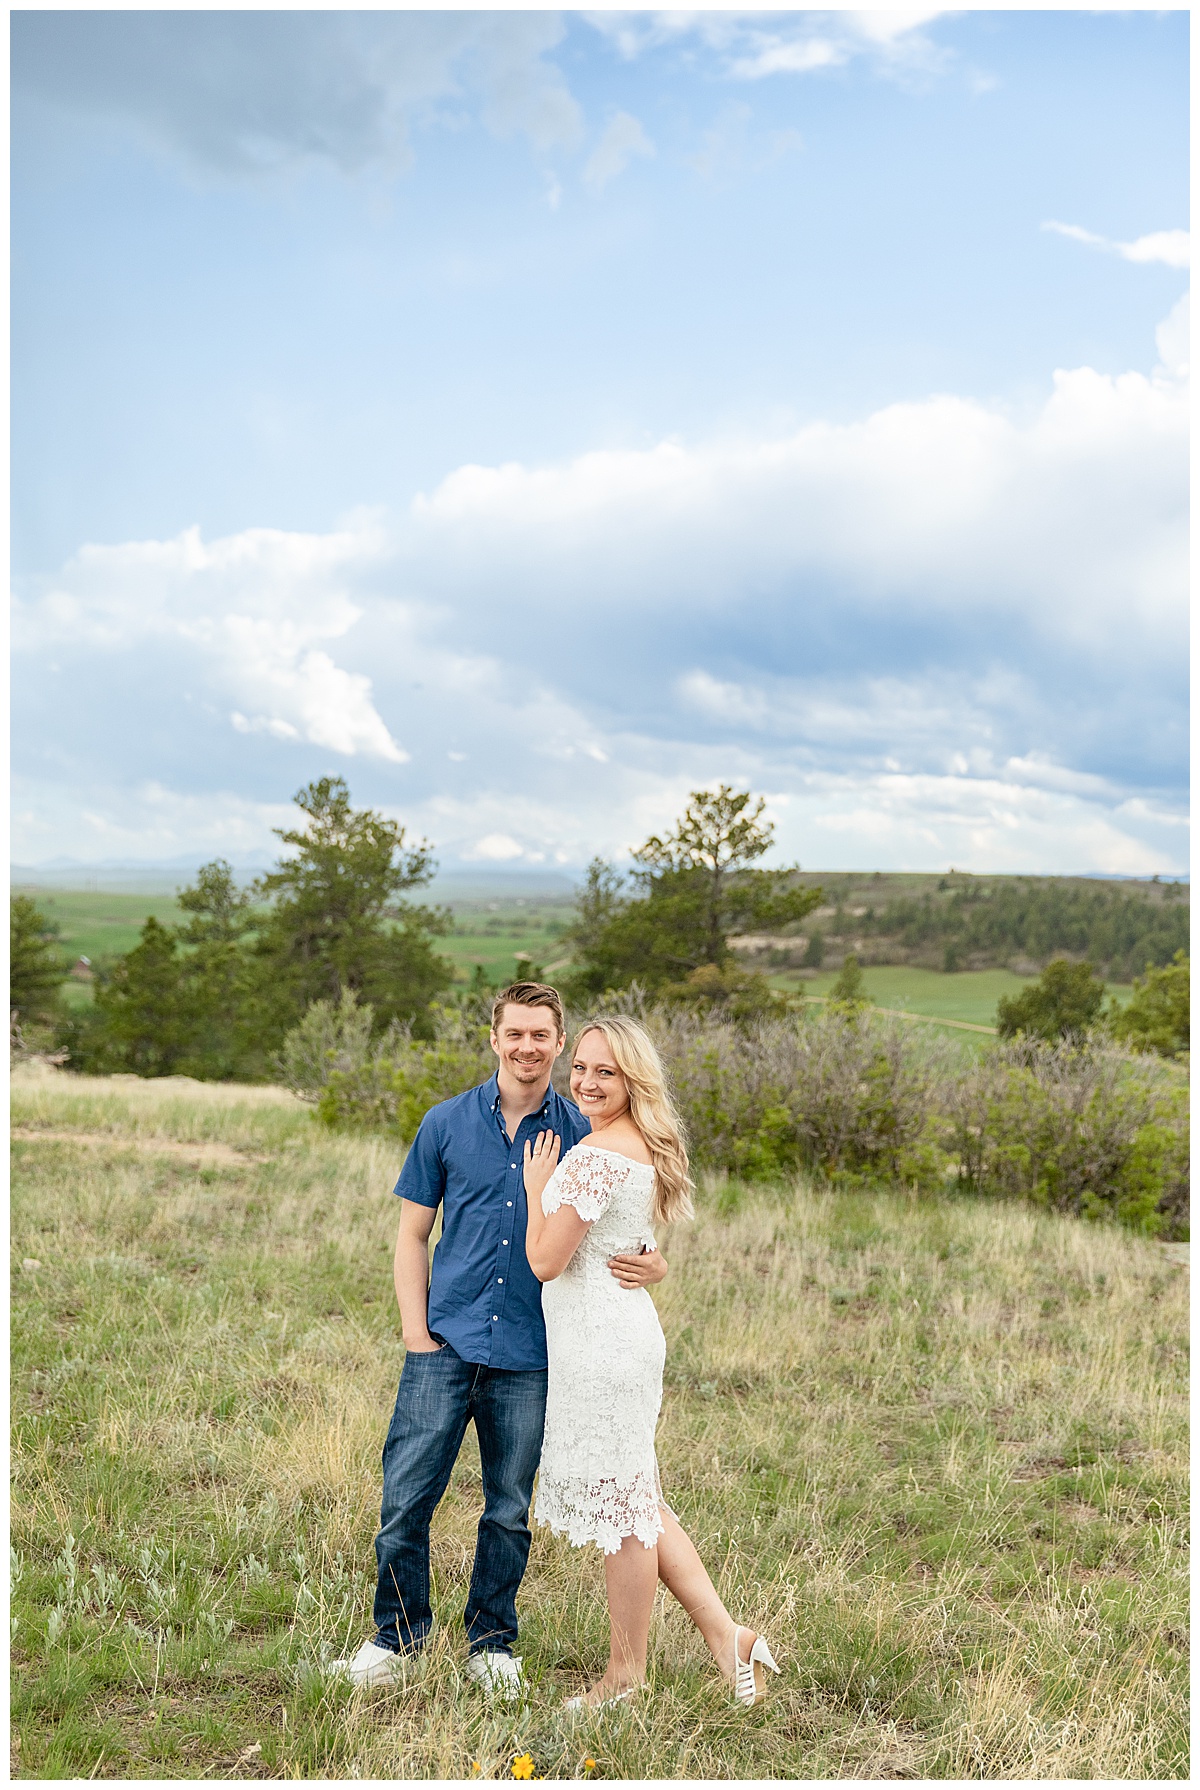 A couple poses for their Colorado engagement session in front of trees and mountains. The man is wearing a blue button up shirt. The woman is blond and wearing a white lace dress.